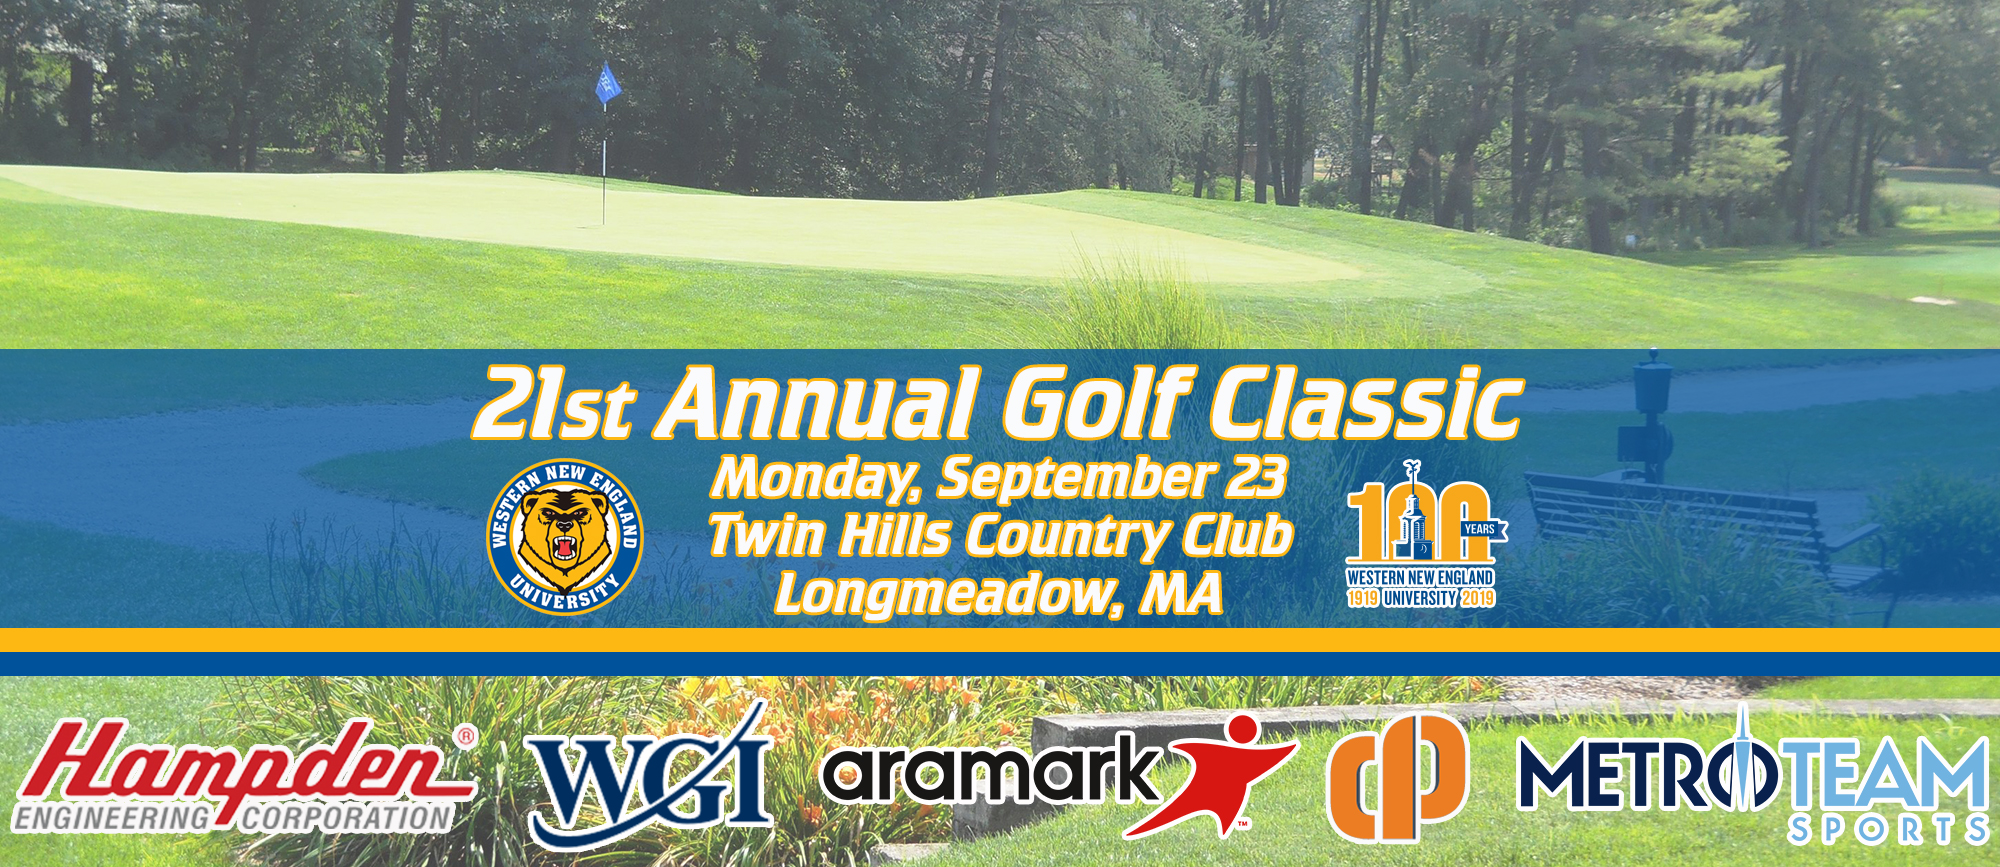 Registration Now Open for 21st Annual Golf Classic